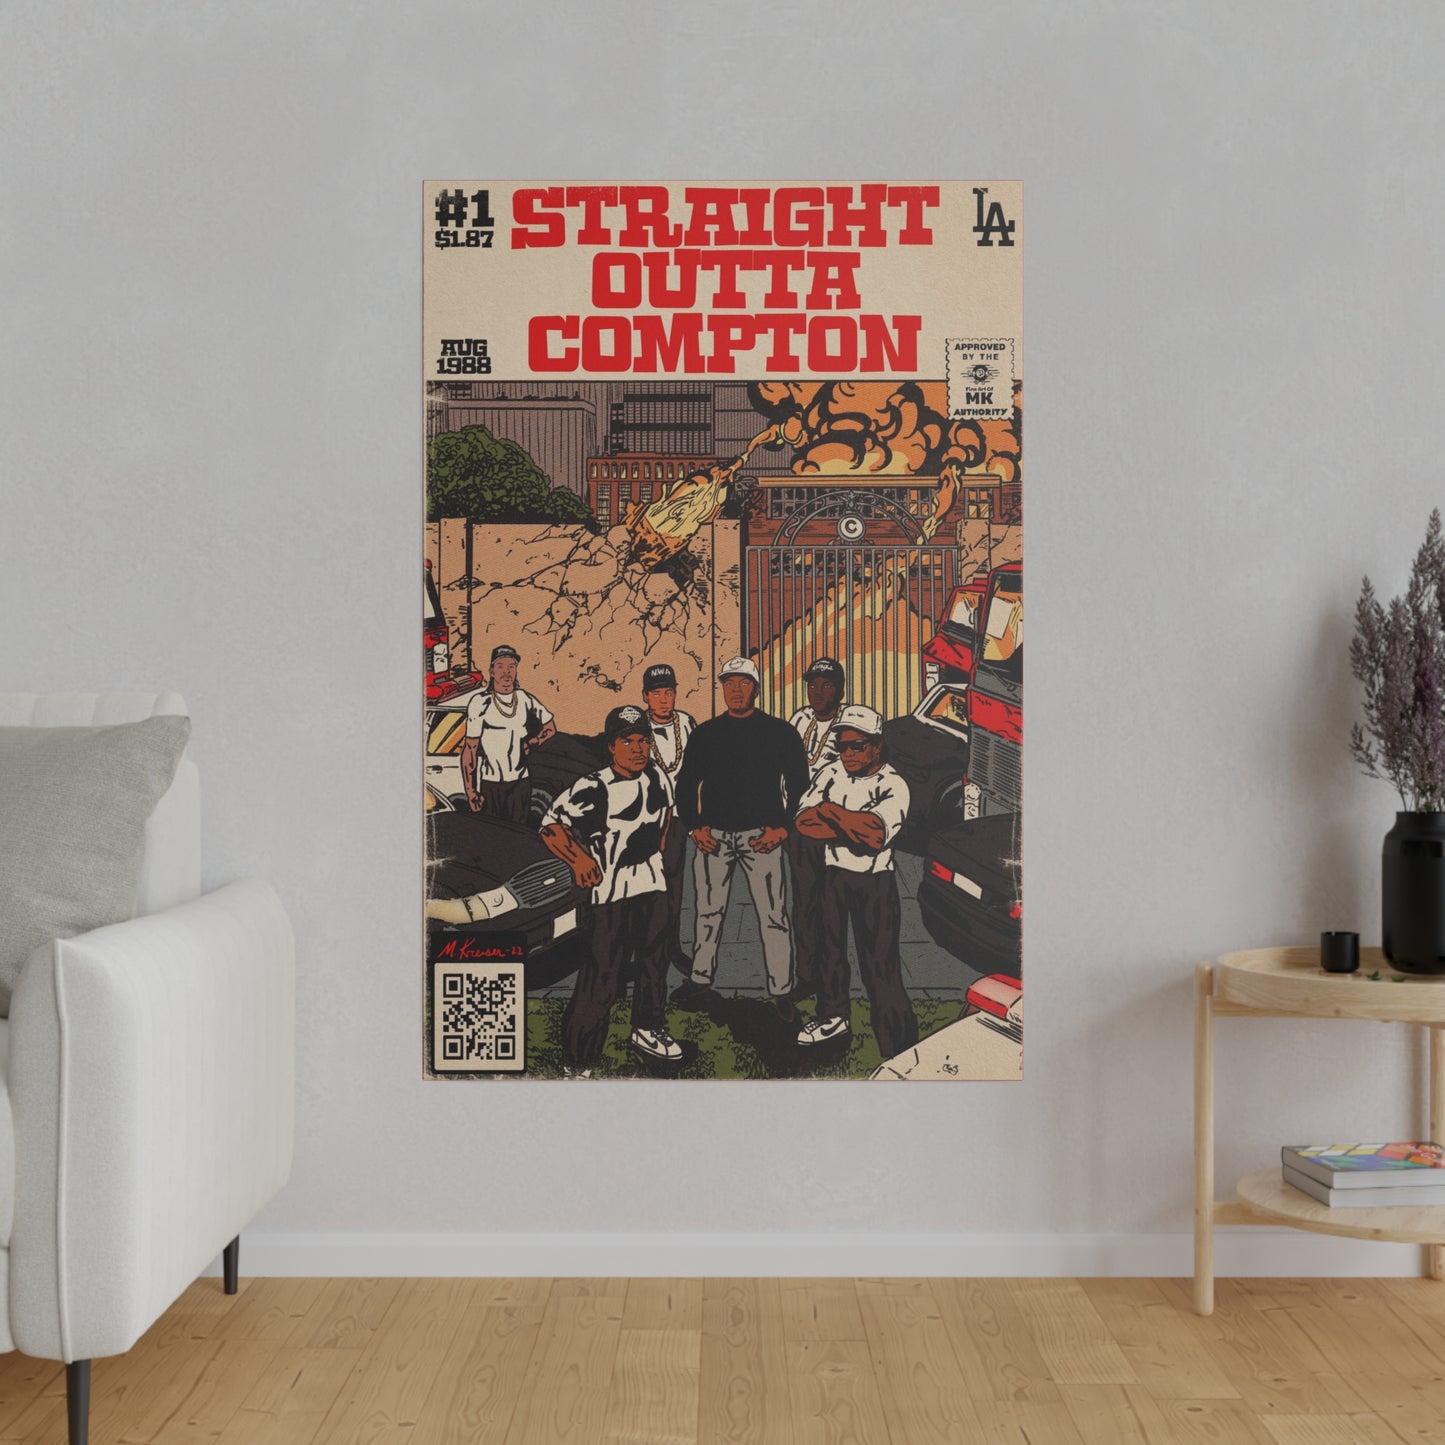 NWA - Straight Outta Compton - Matte Canvas, Stretched, 0.75"